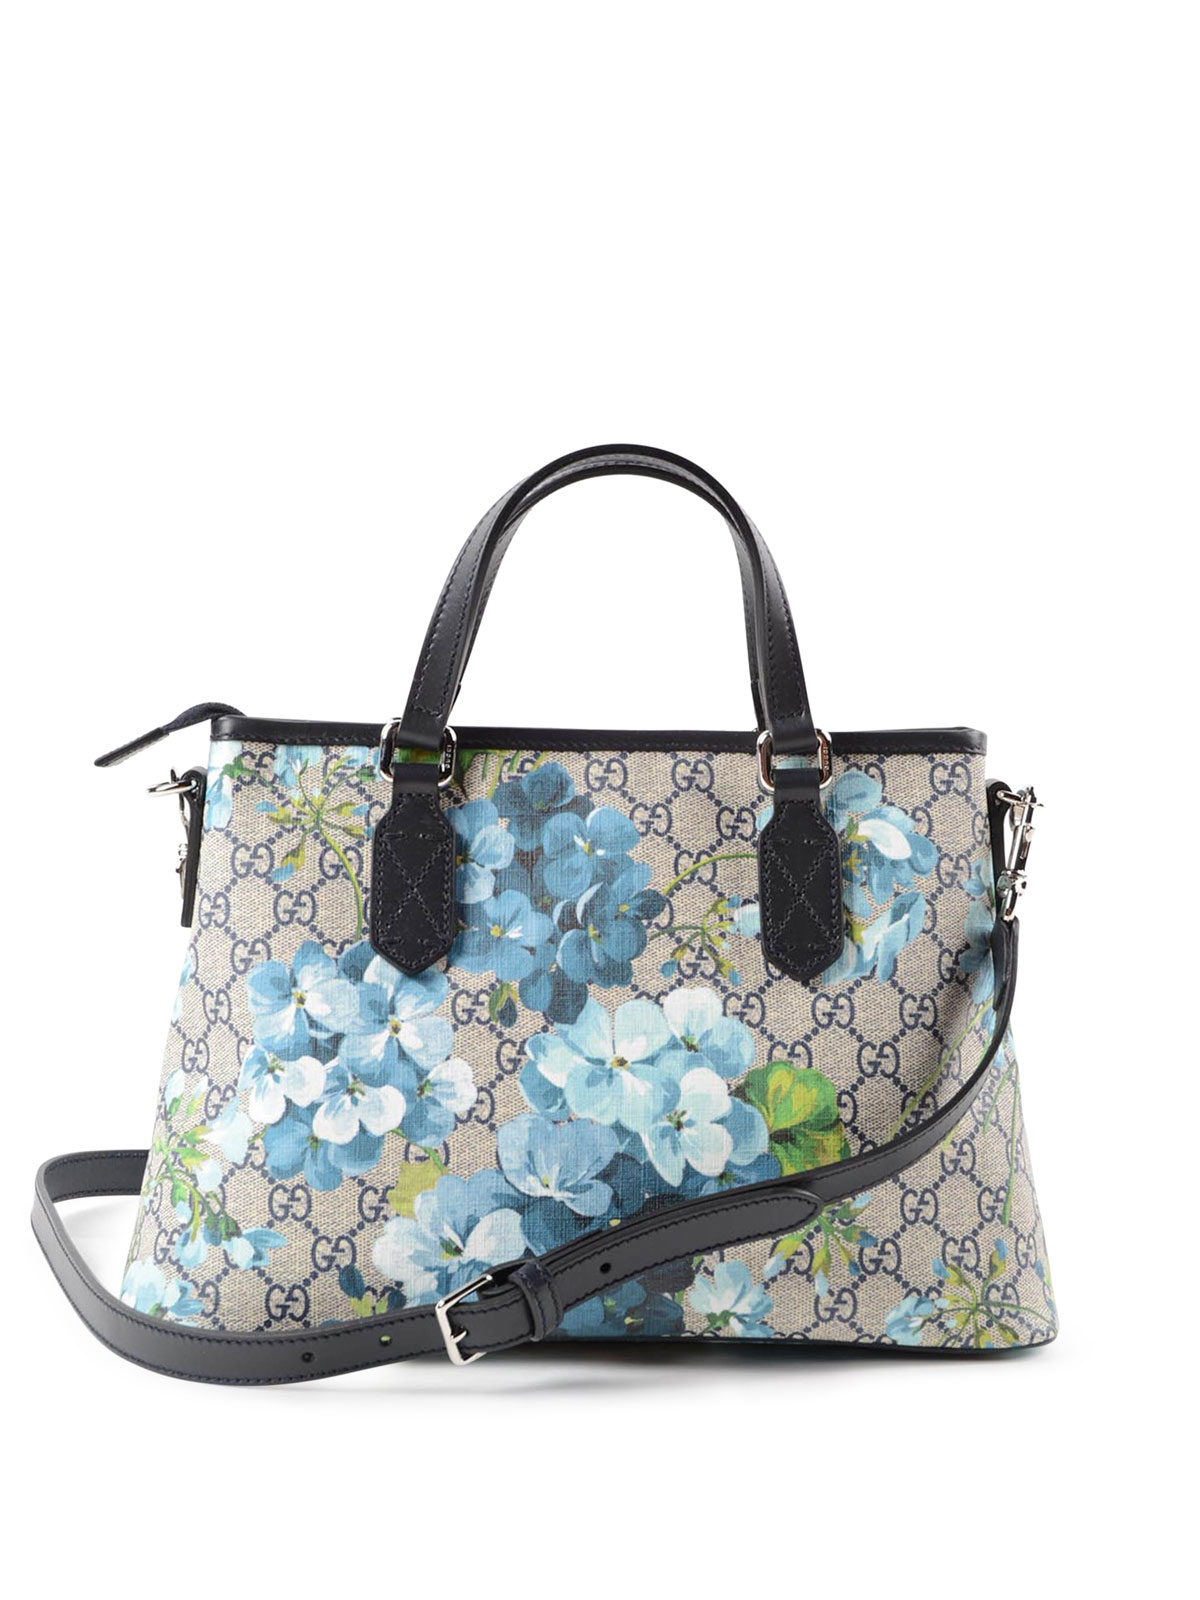 GG blooms tote by Gucci - totes bags | iKRIX